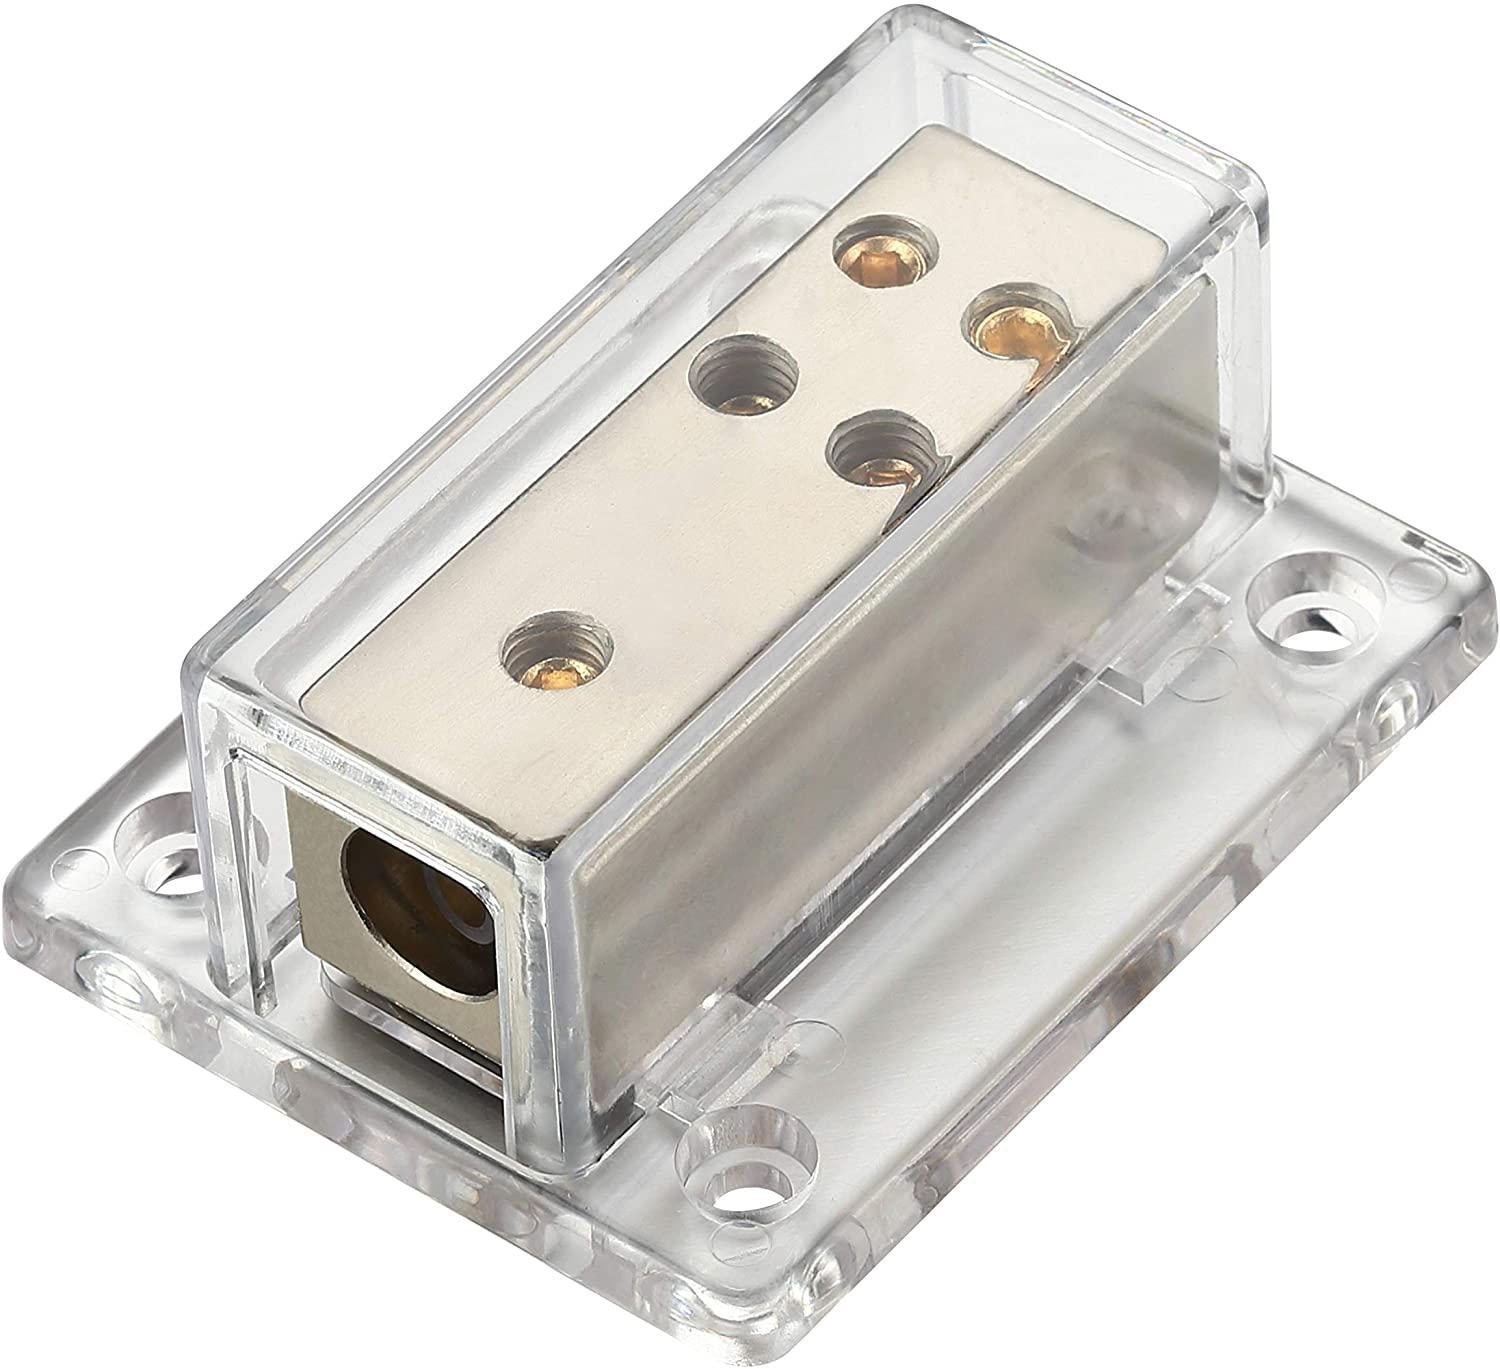 Freajoin, Freajoin 4/8/10 AWG Gauge Power Distribution Block 4 Gauge in - (4) 8/10 Gauge Out, Satin Nickle Plated Internal Material and High-Strength Clear Housing